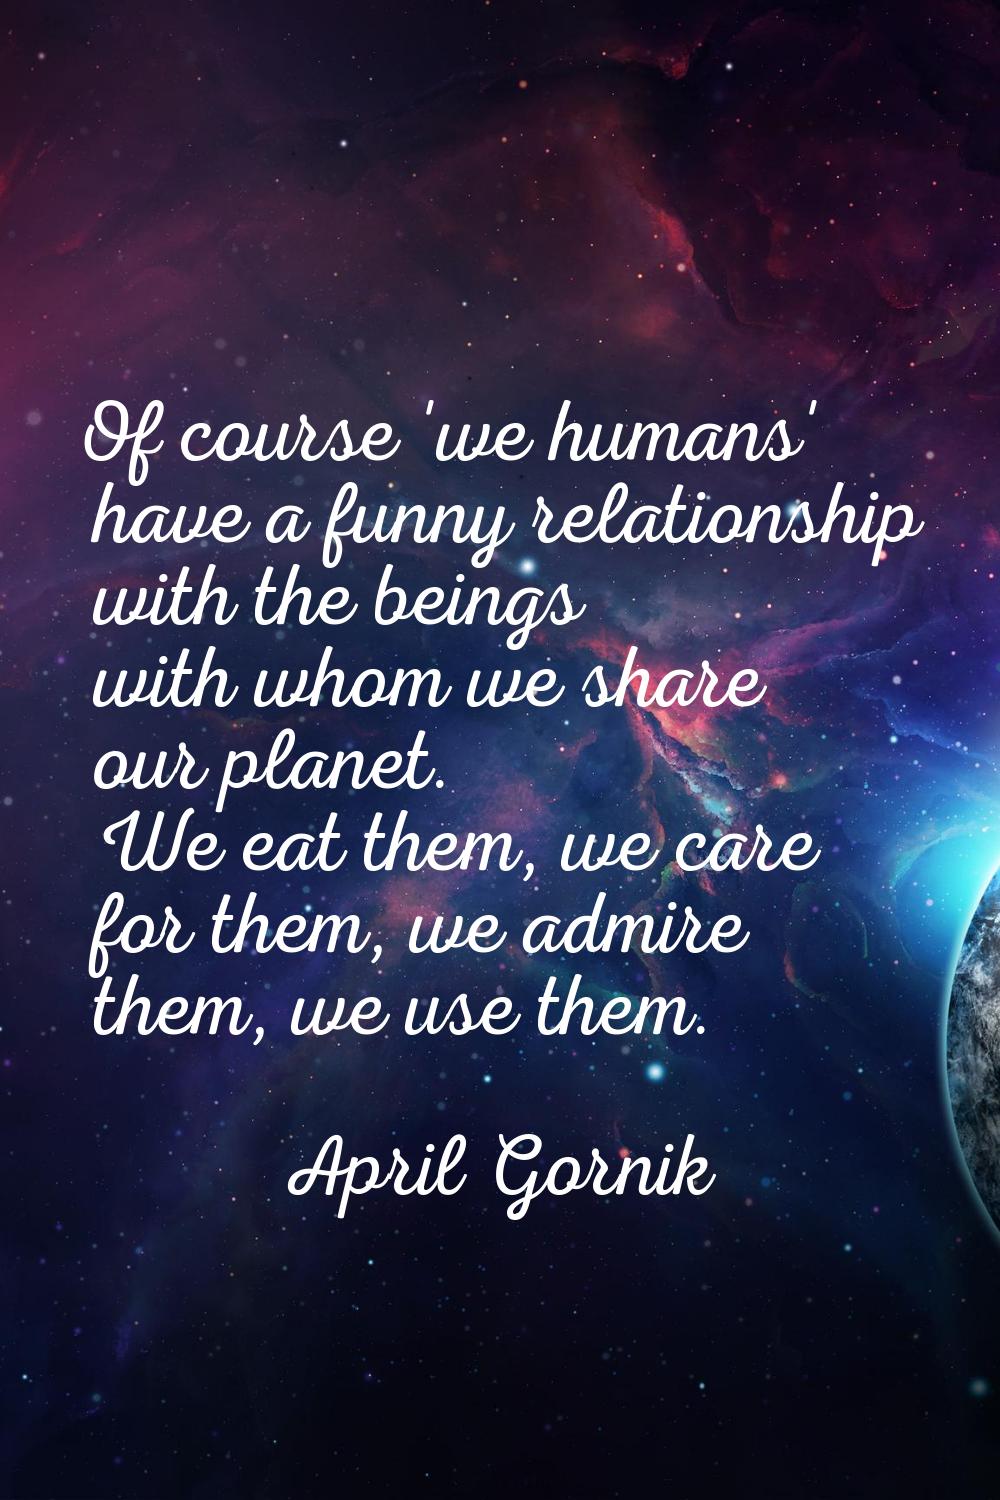 Of course 'we humans' have a funny relationship with the beings with whom we share our planet. We e